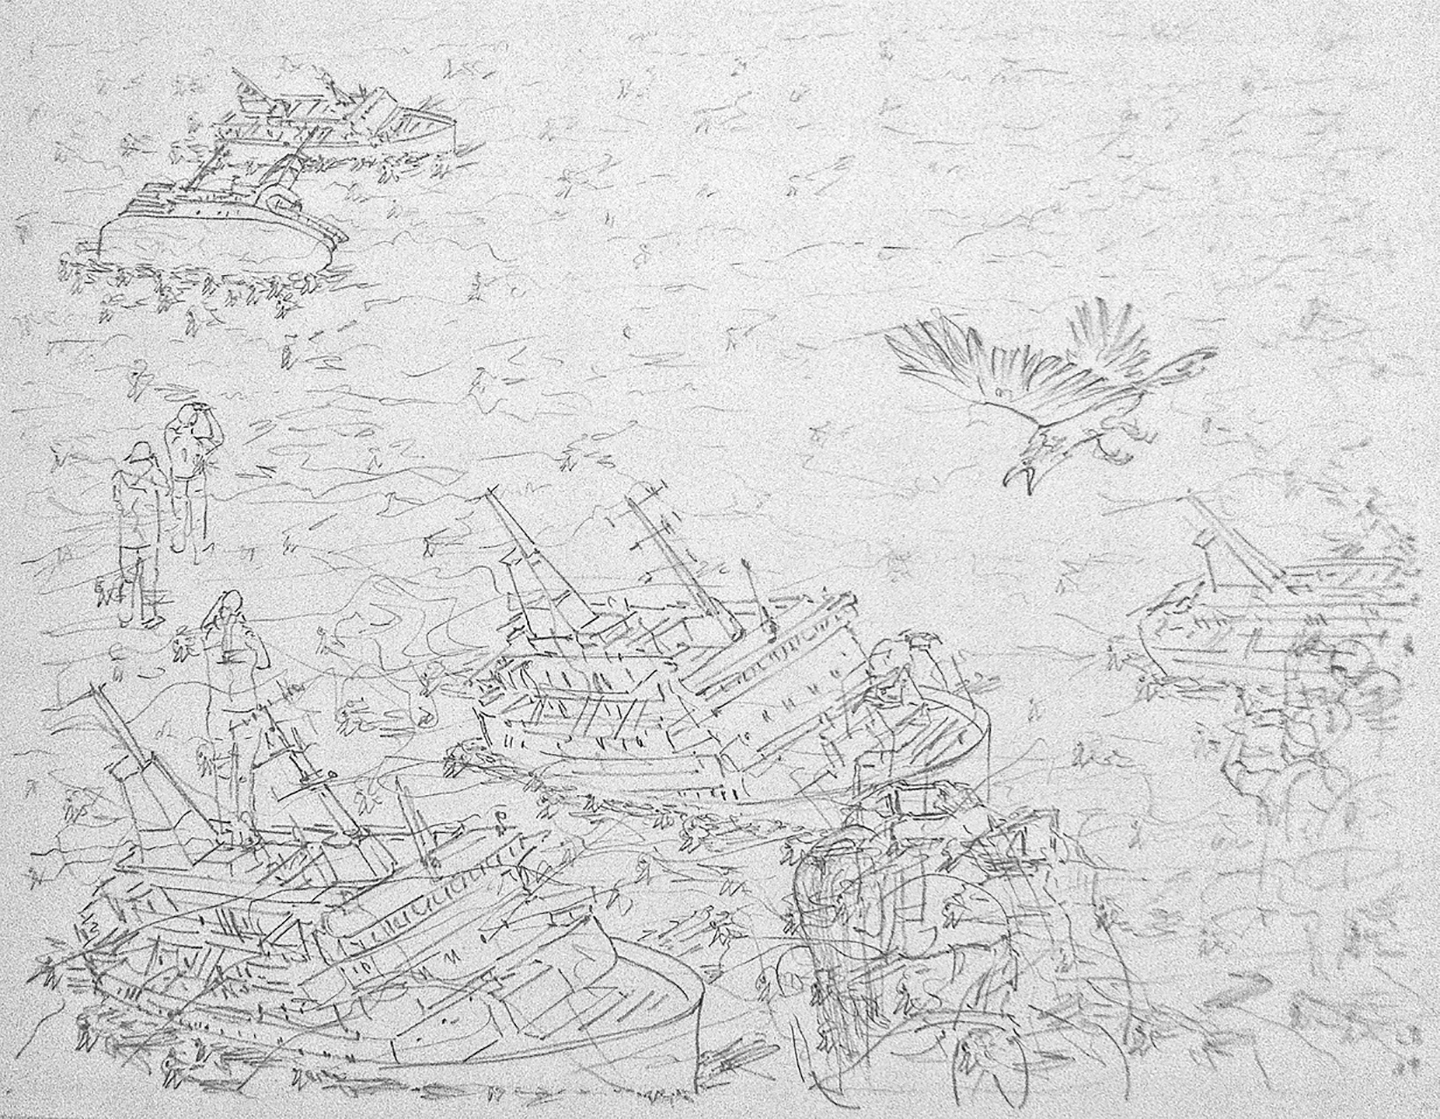 Leo Brunschwiler, sinking ships, dead redtails, tourists and attacking bird, pencil on polyester foil, 28 cm x 35 cm , 2019